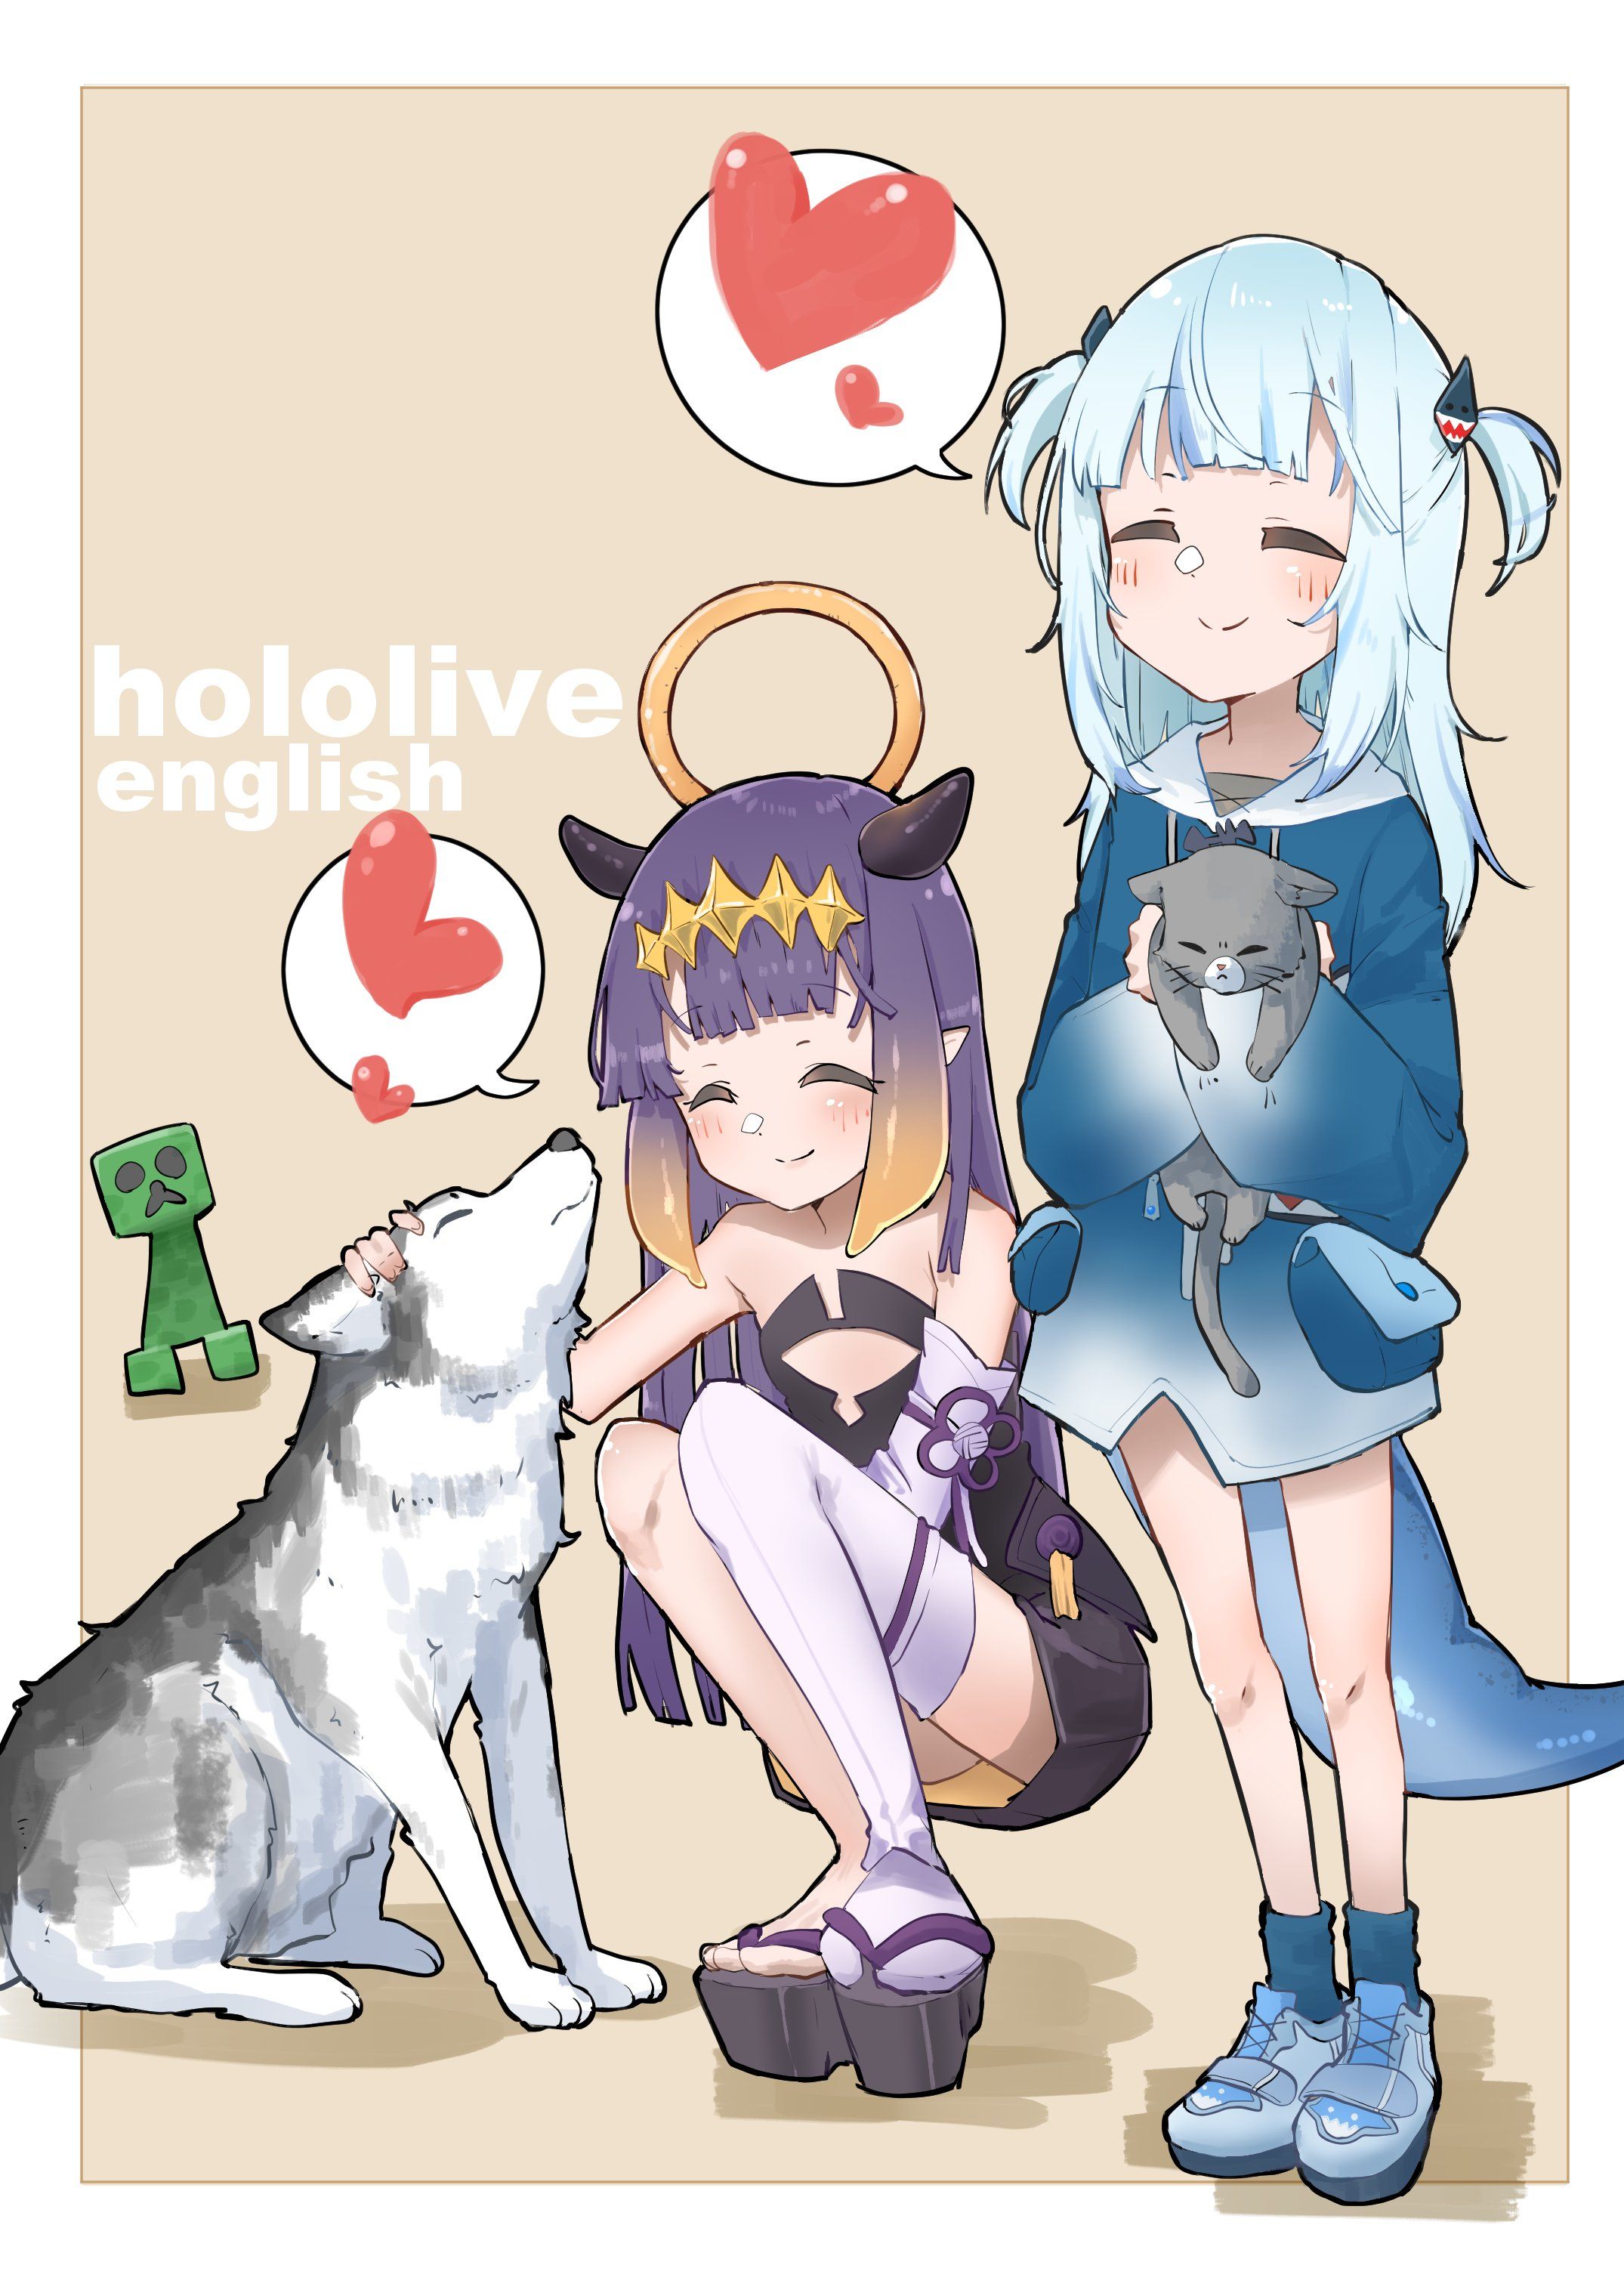 gawr gura, gawr gura, and amano pikamee (hololive and 2 more) drawn by  luant